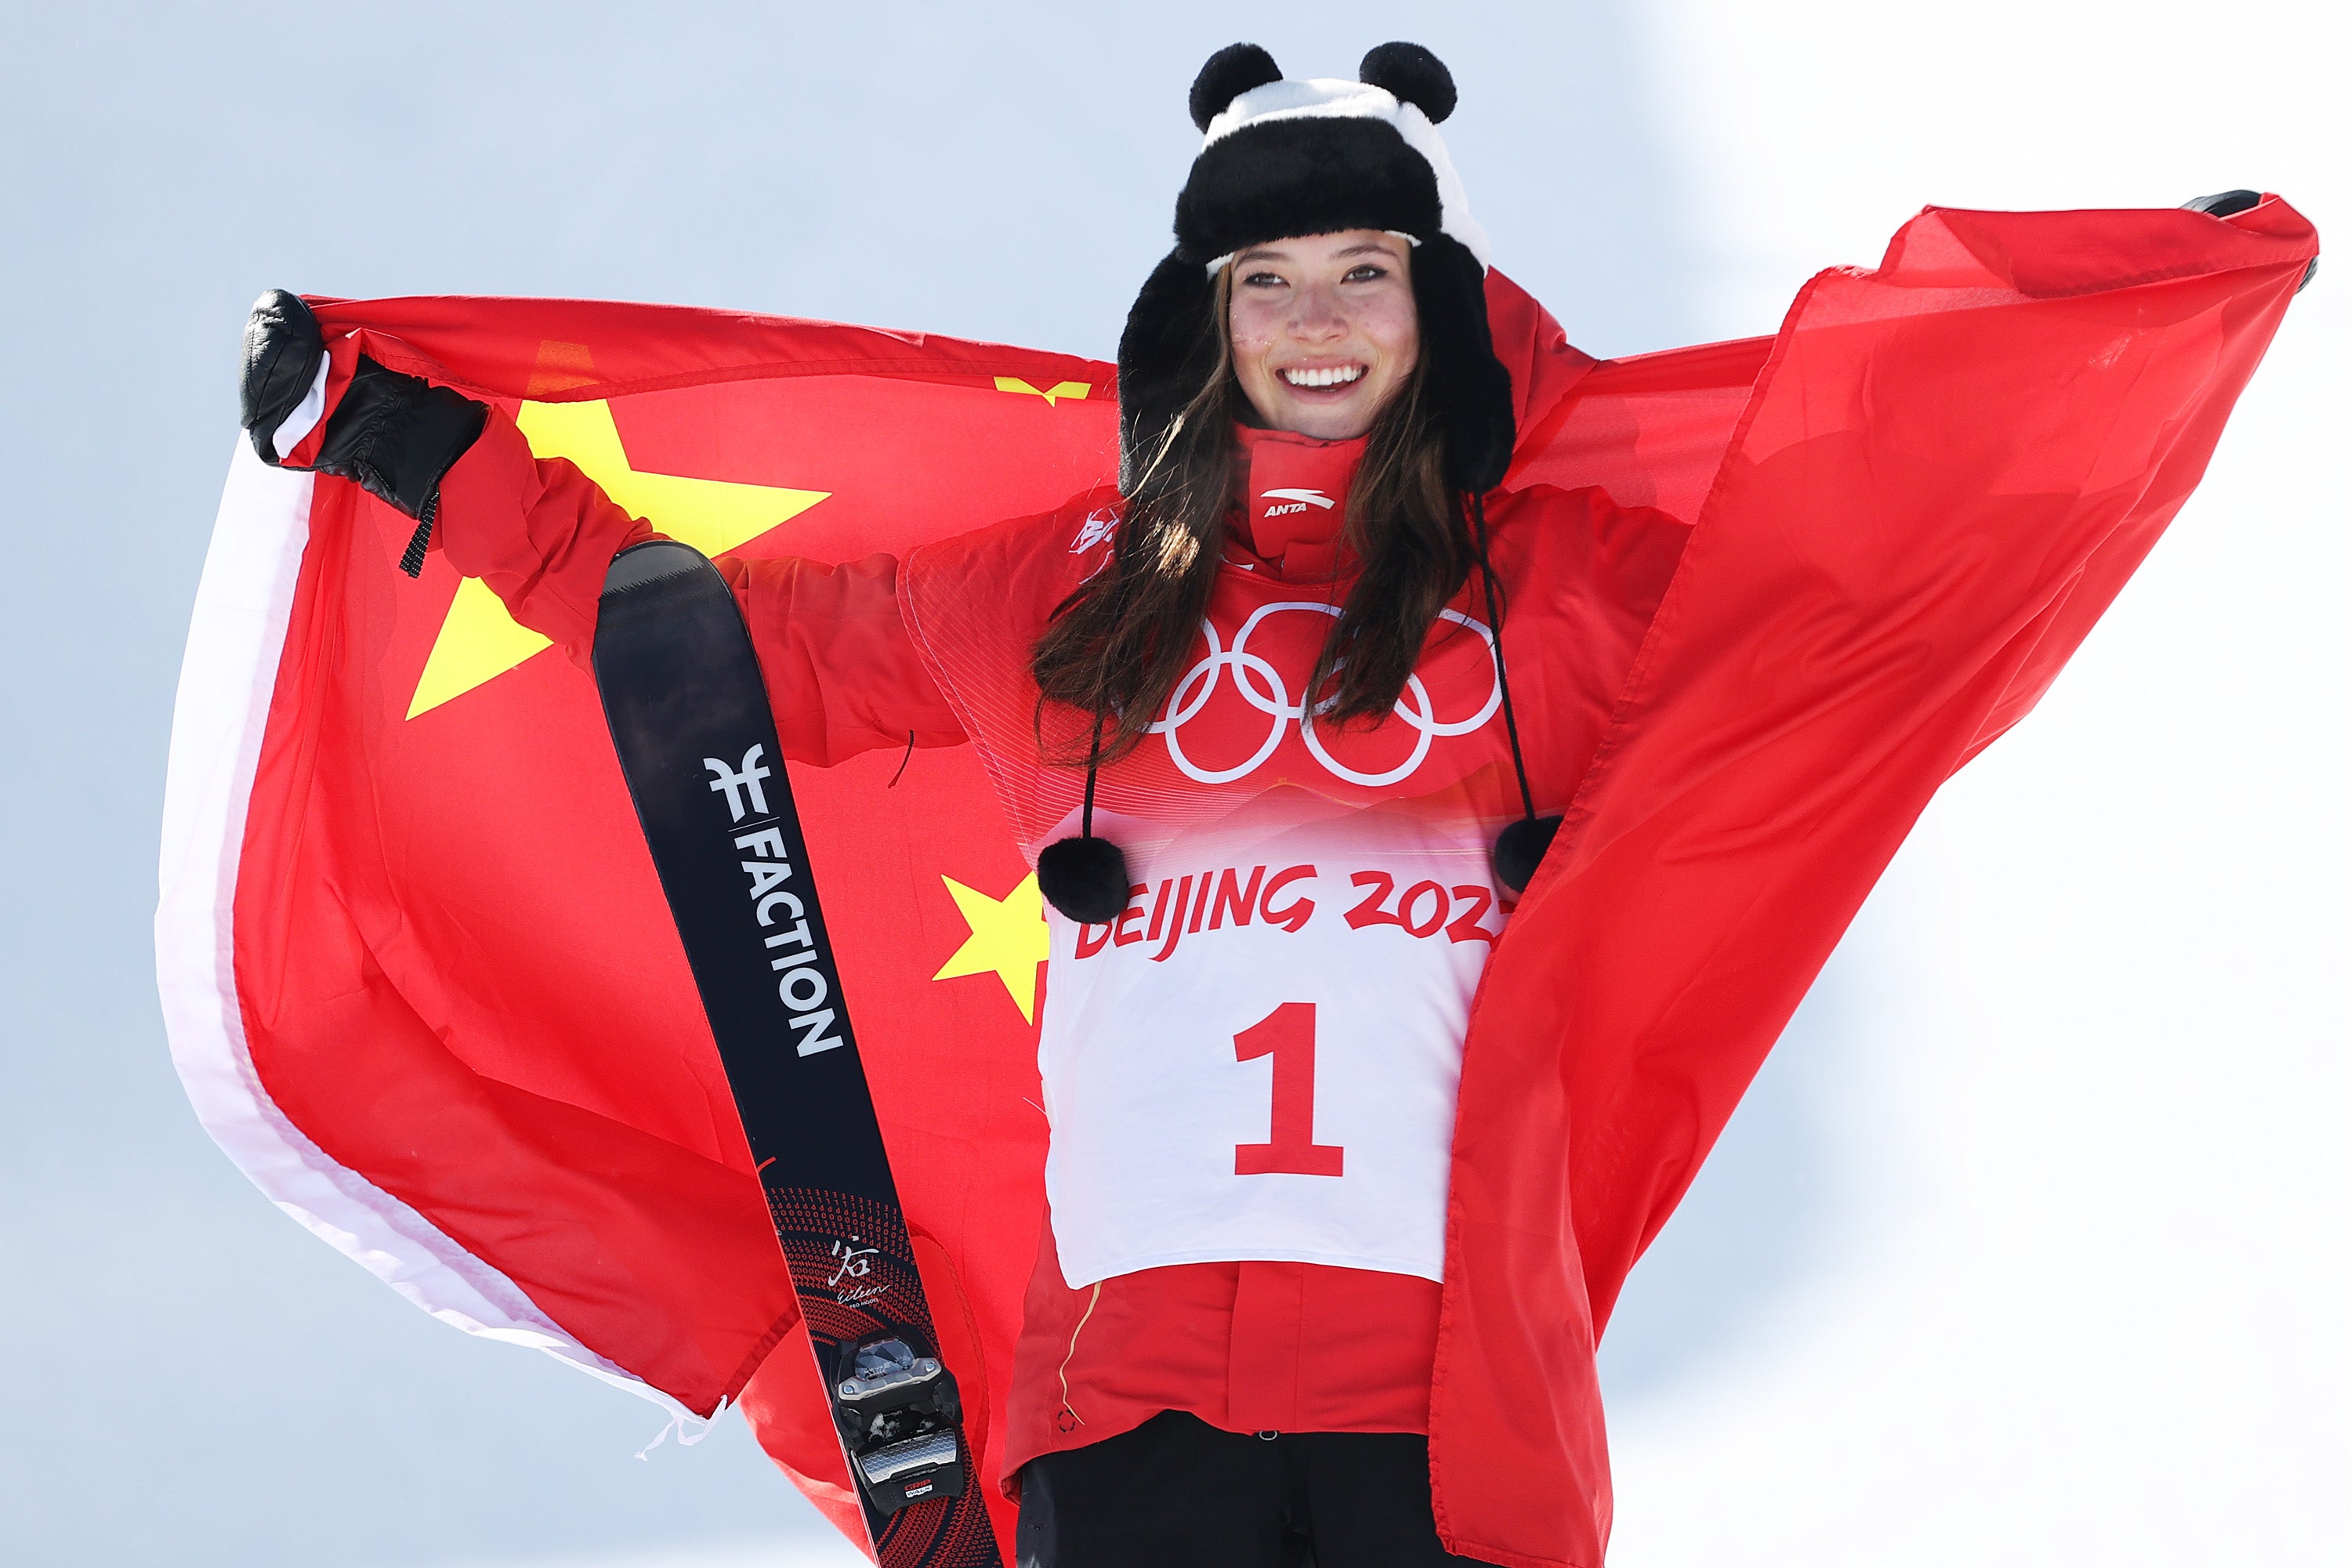 Eileen Gu won three medals for China and was a controversial face of the Games